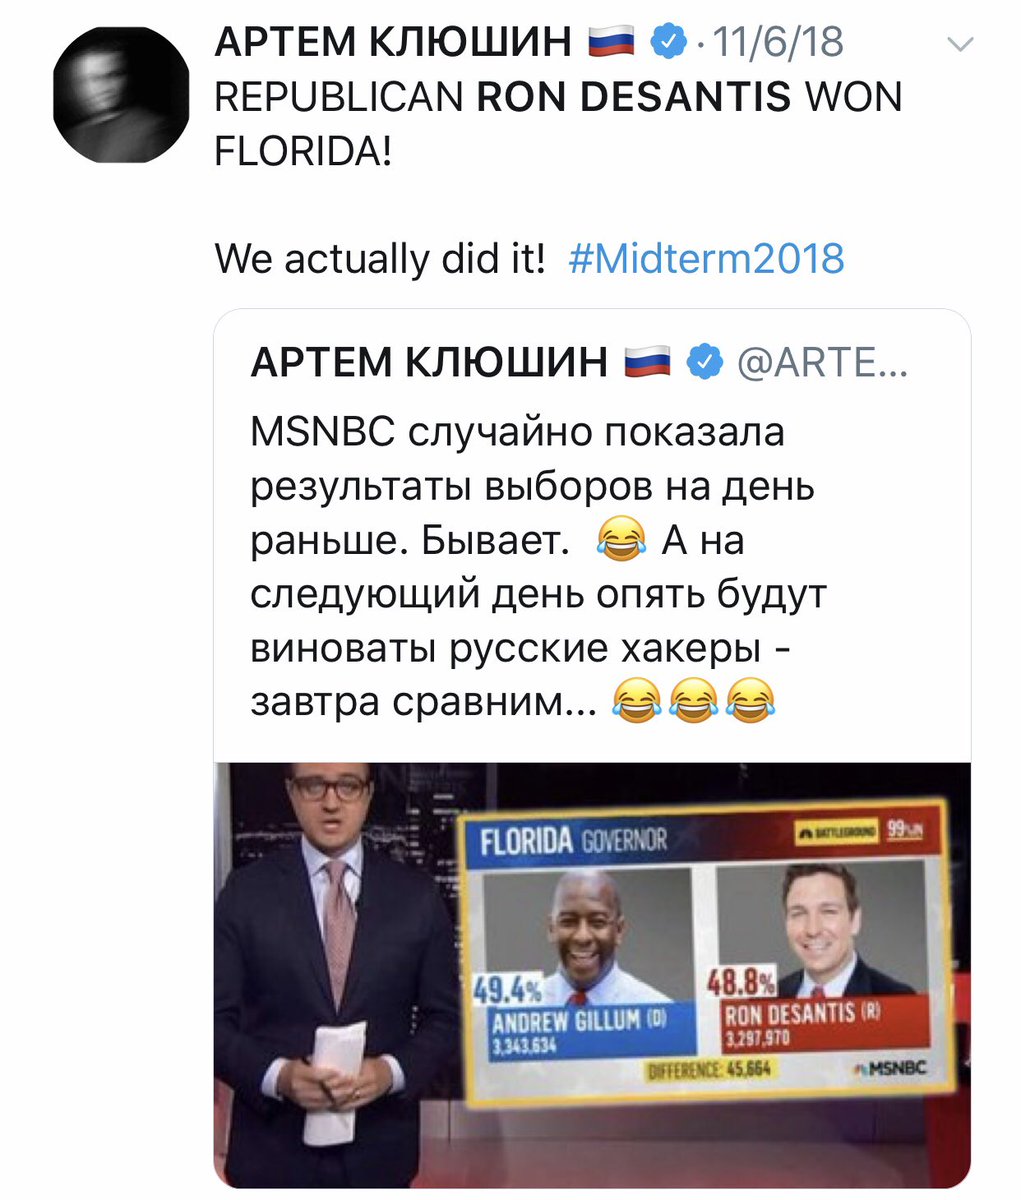 @ddale8 Sorry @realDonaldTrump 
@RonDeSantisFL @GovDeSantis didn’t win solely because of your endorsement...

🇷🇺 RUSSIA is proudly taking credit for their part in his election win:

“We actually did it! #Midterms2018”